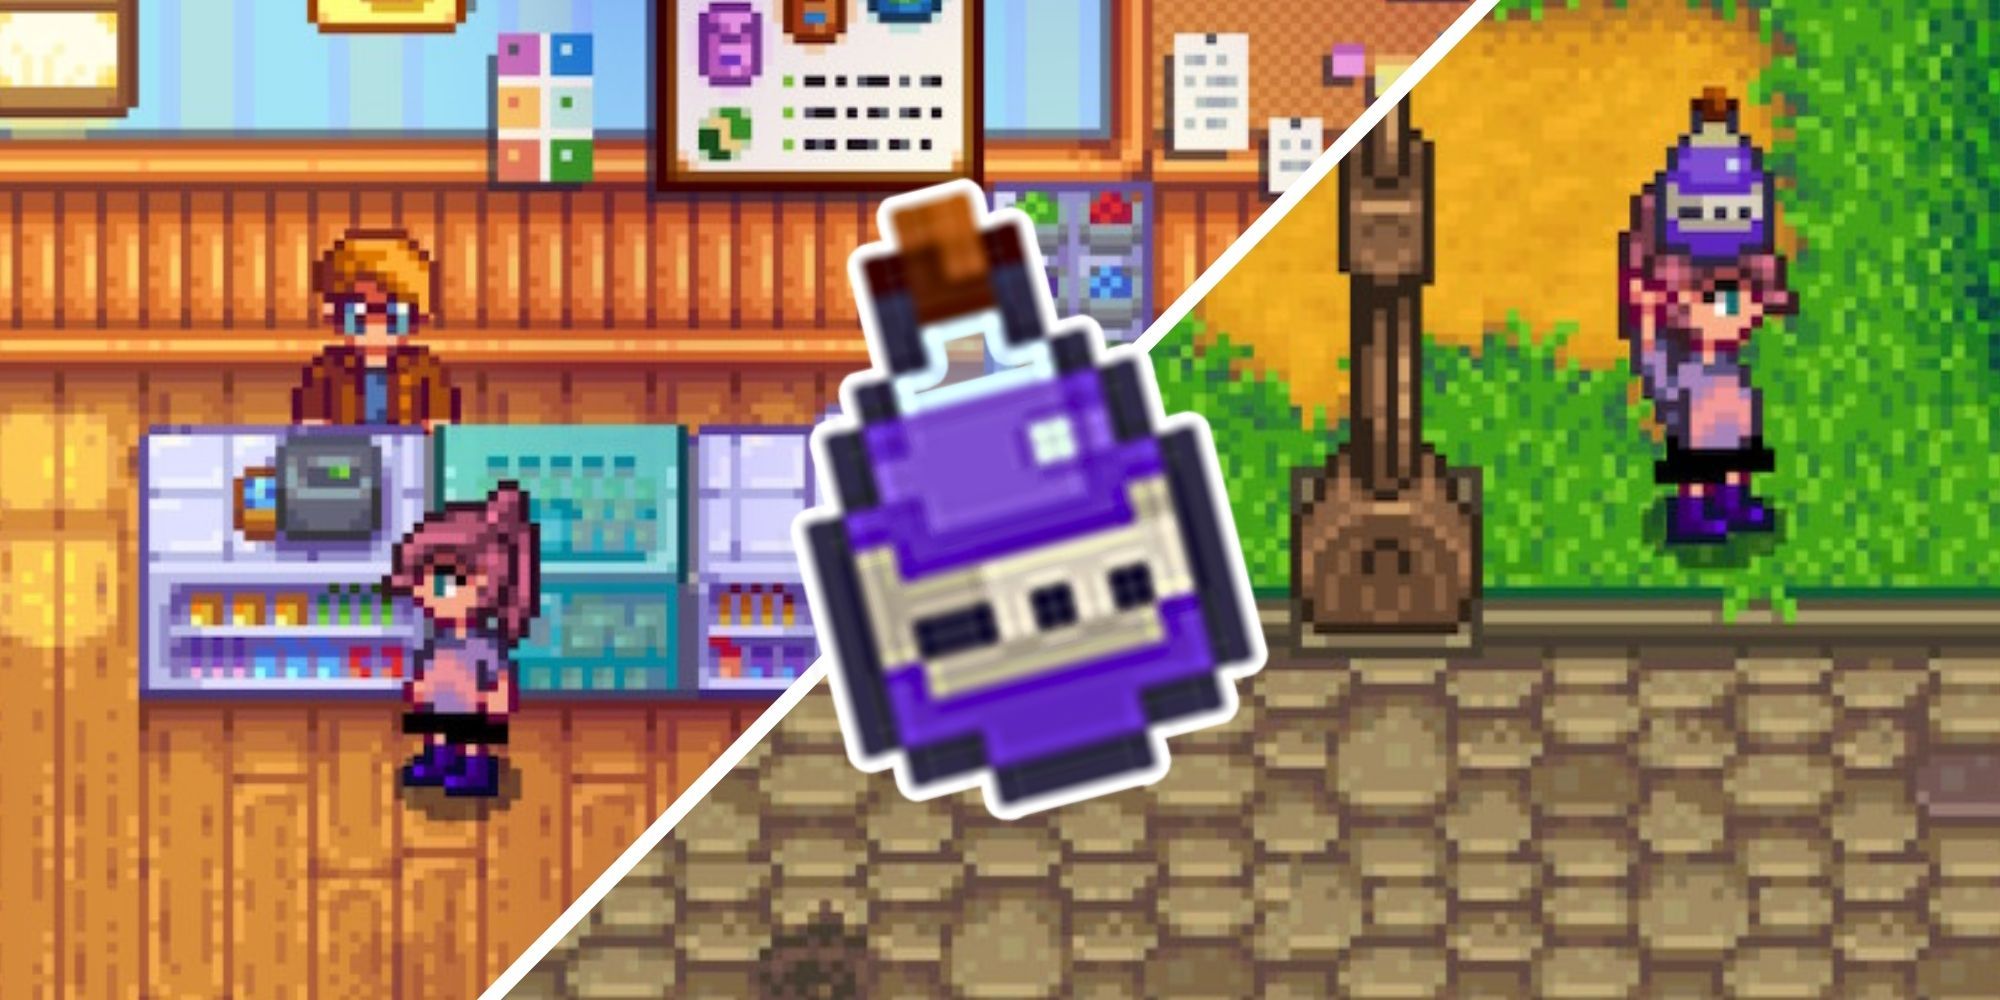 Split image showing Pierre's General Store and Stardew Valley player holding vinegar